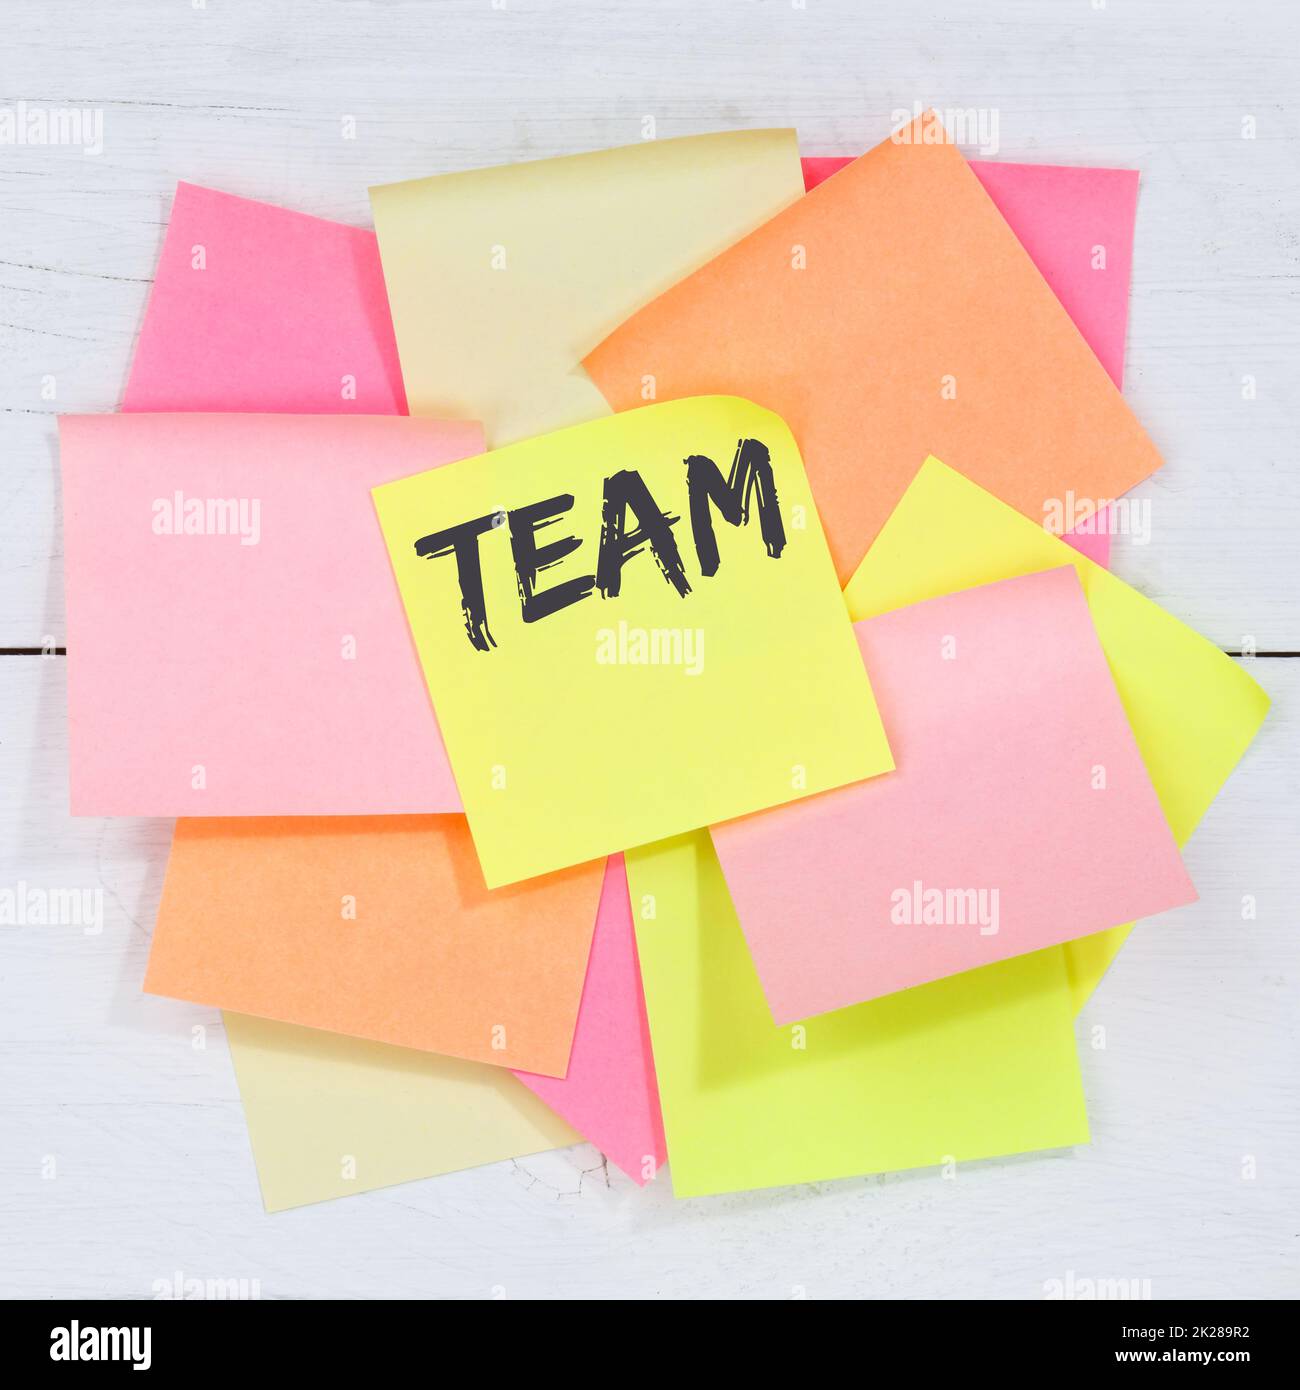 Team teamwork working together business concept desk note paper Stock Photo